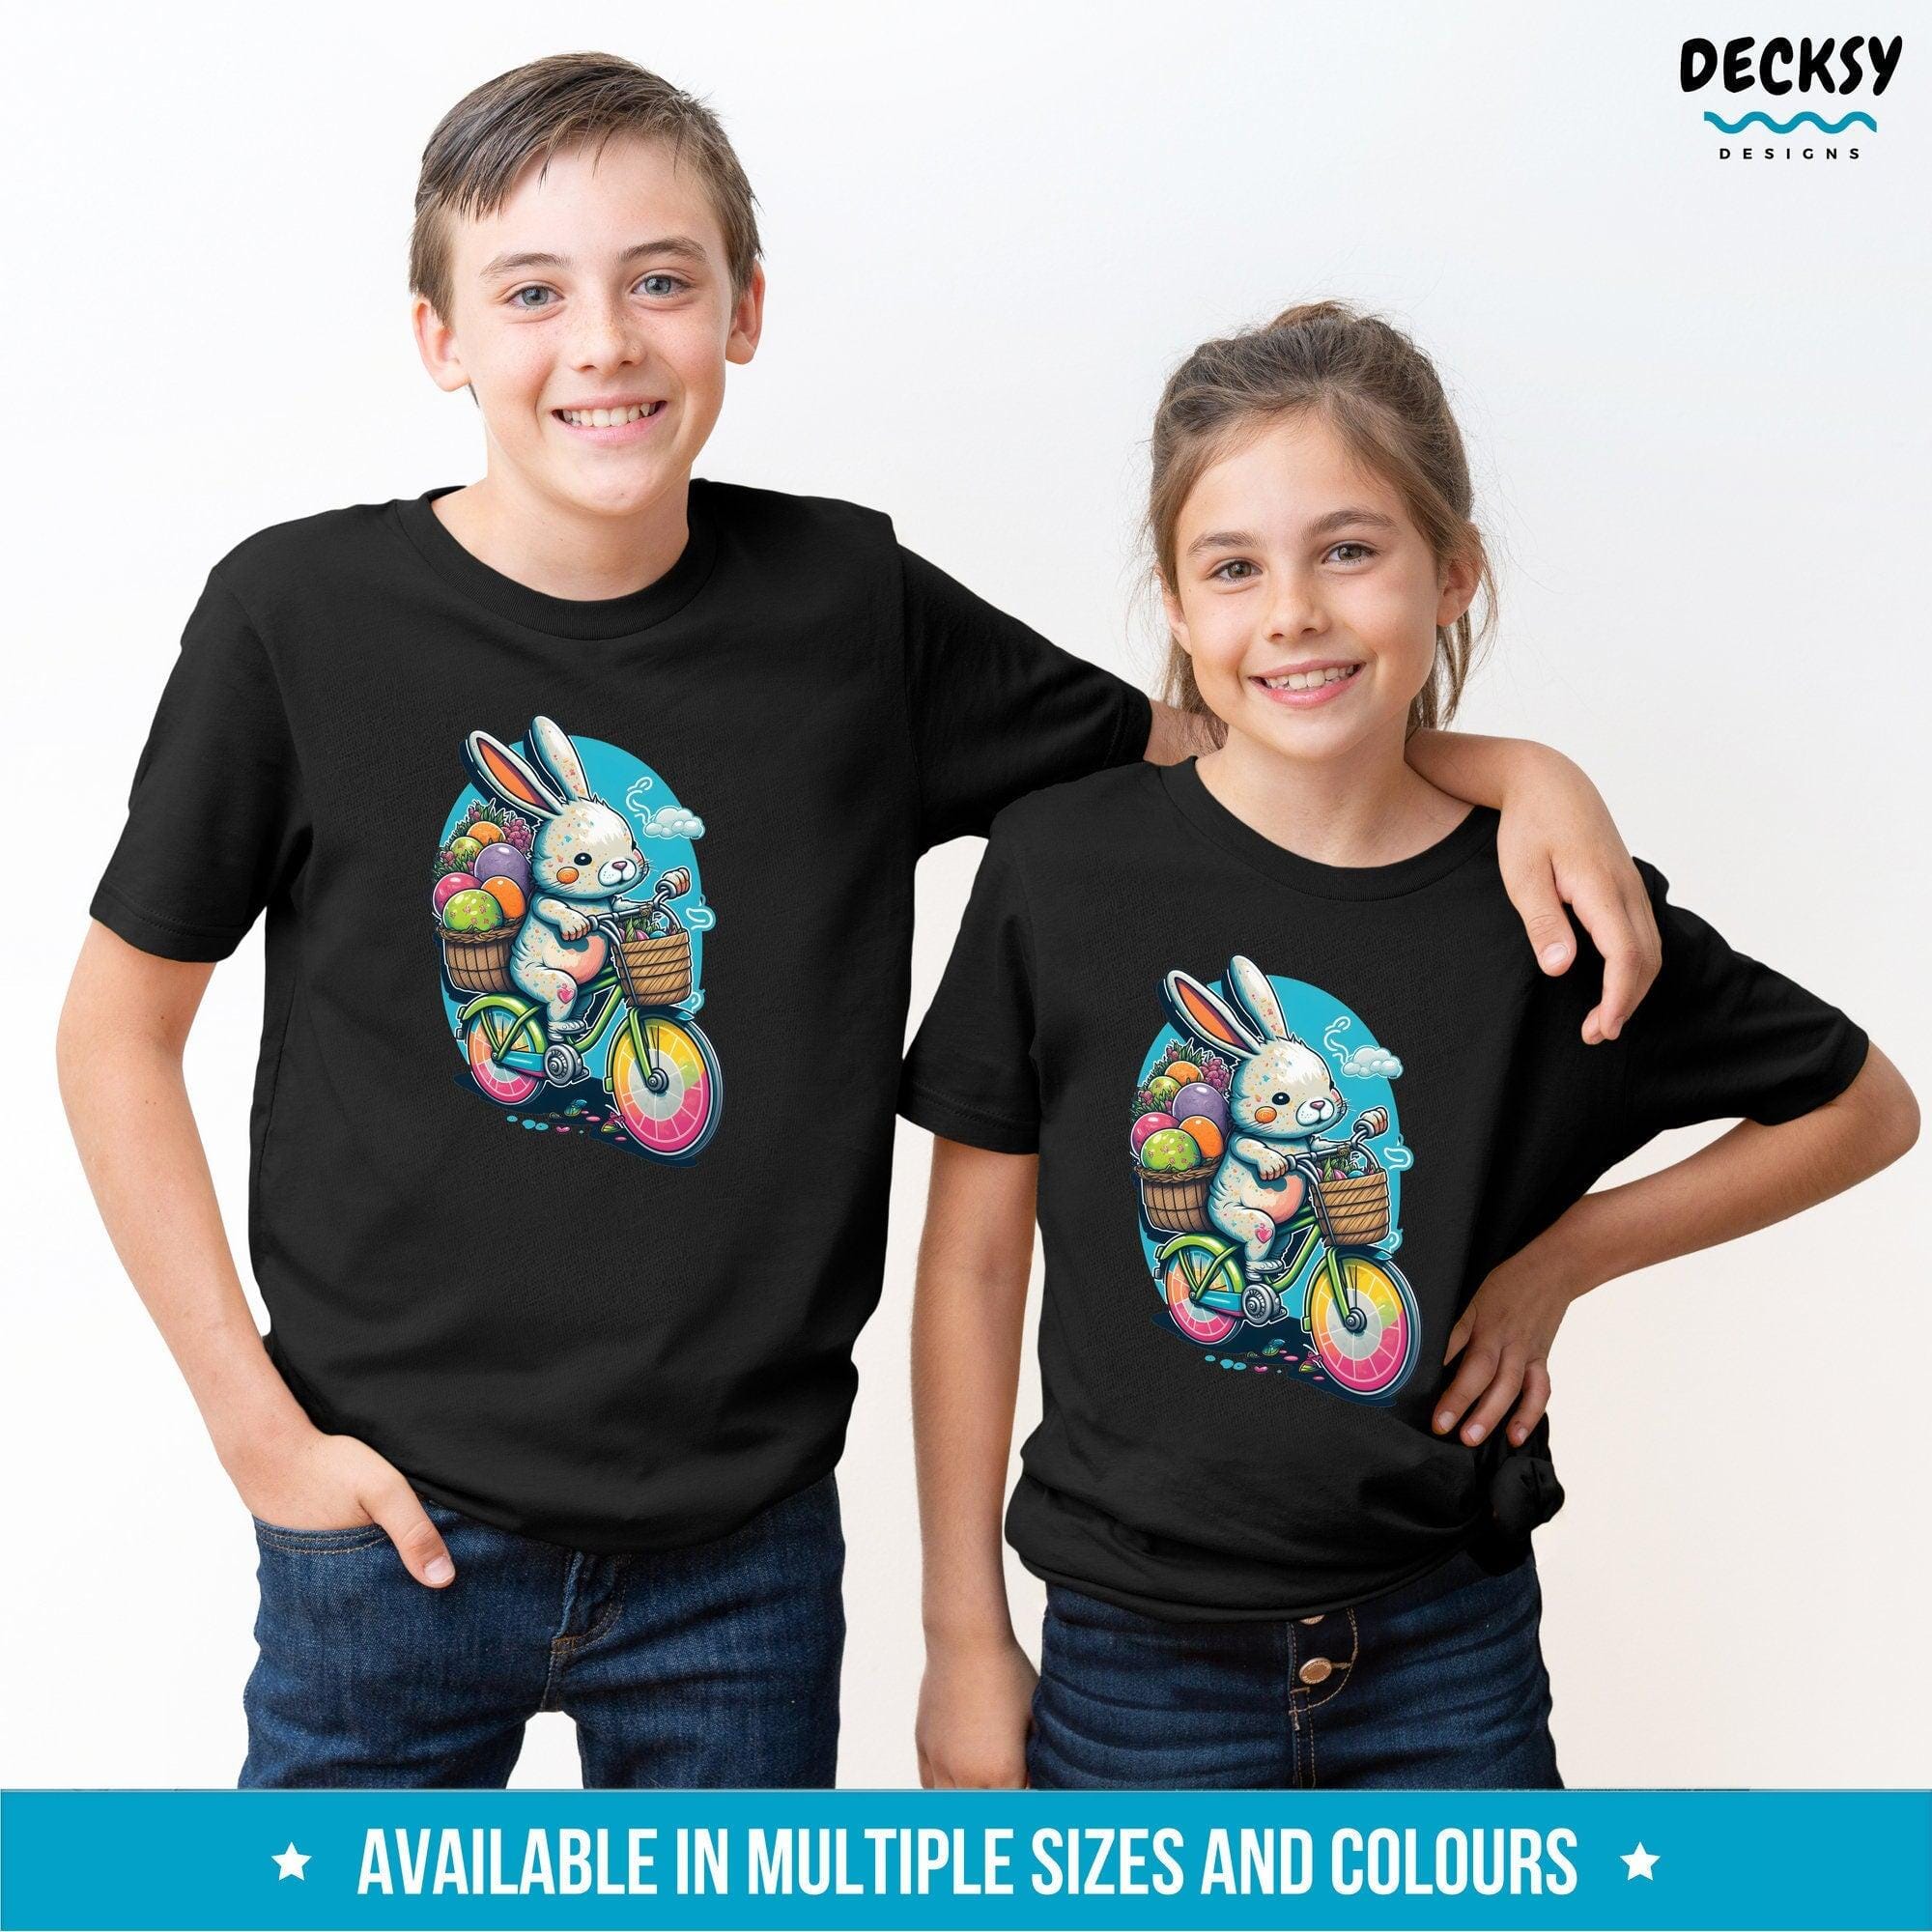 Cute Easter Bunny Tshirt for Kids, Easter Egg Hunt Gift-Clothing:Gender-Neutral Adult Clothing:Tops & Tees:T-shirts:Graphic Tees-DecksyDesigns